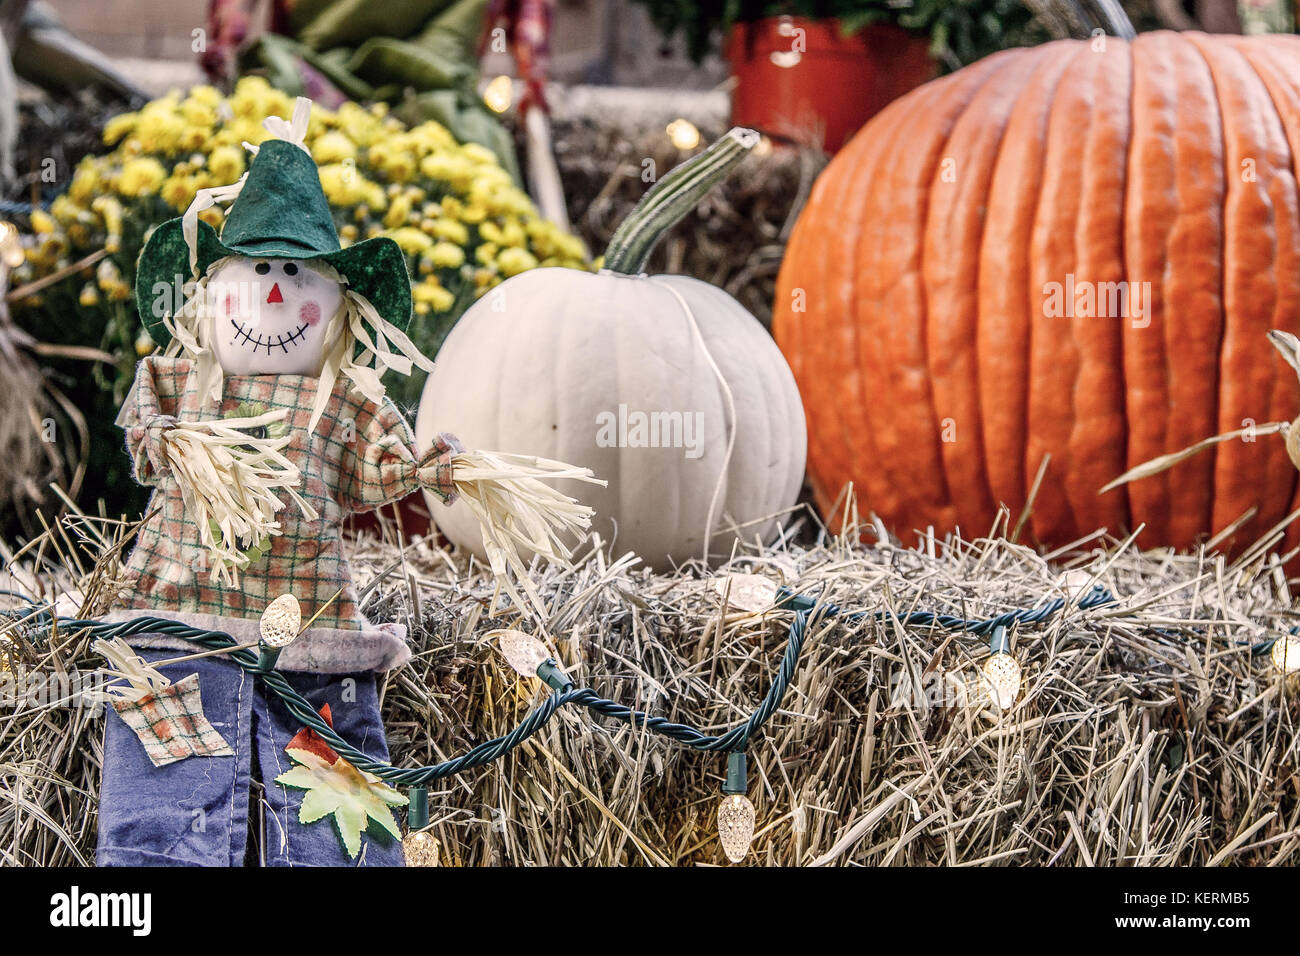 Halloween decoration with pumpkins, cloth scarecrow, lights, and hay. Stock Photo